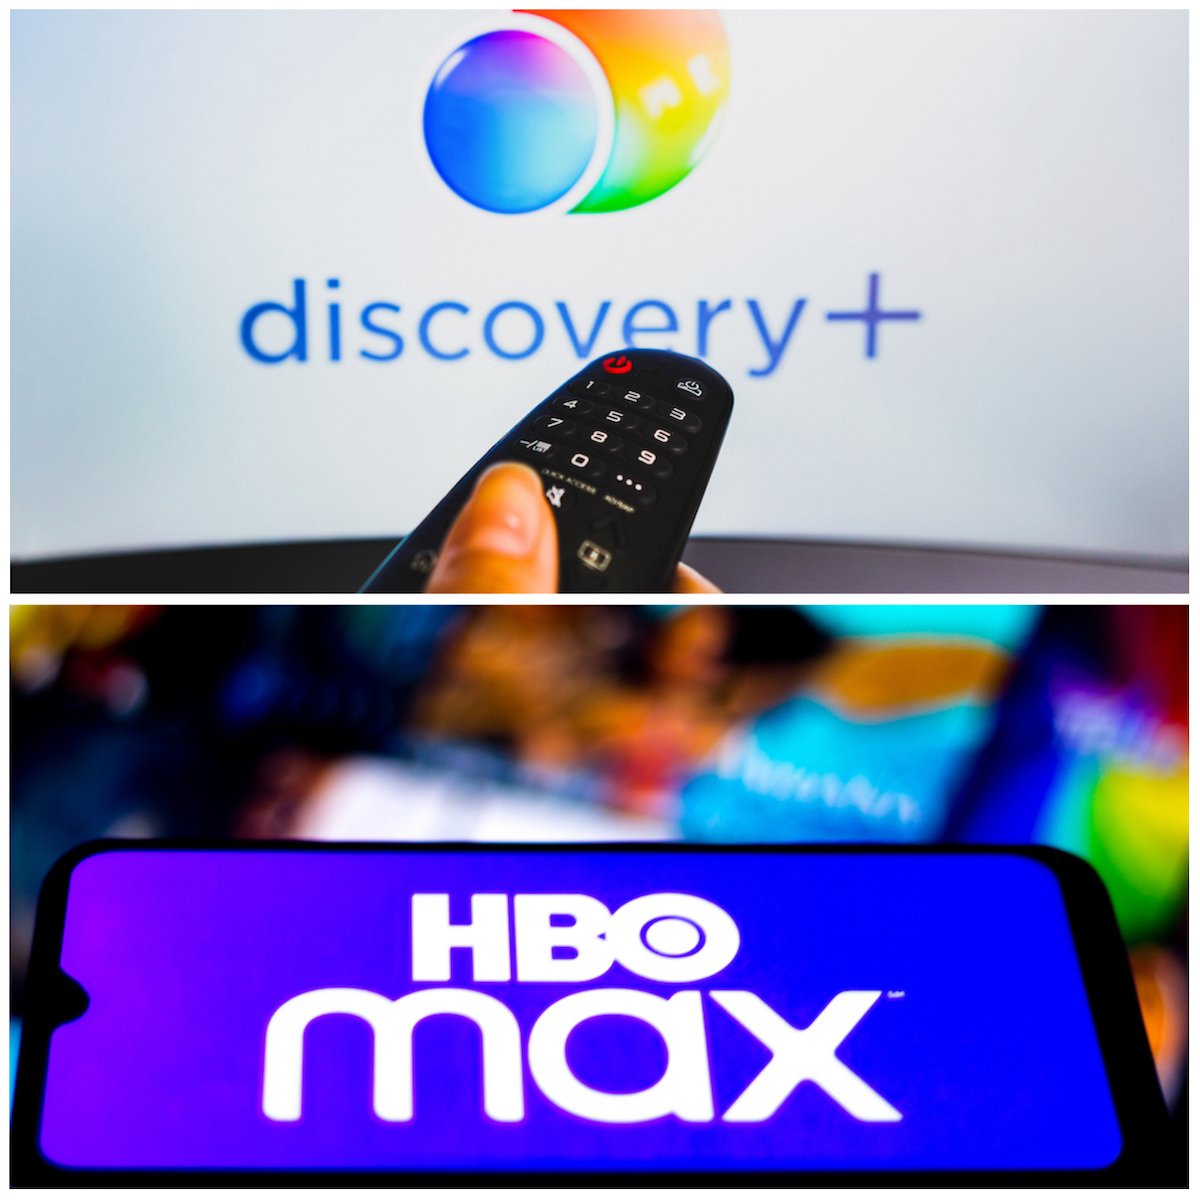 HBO Max, discovery+ Merging to Form Single Streaming Service